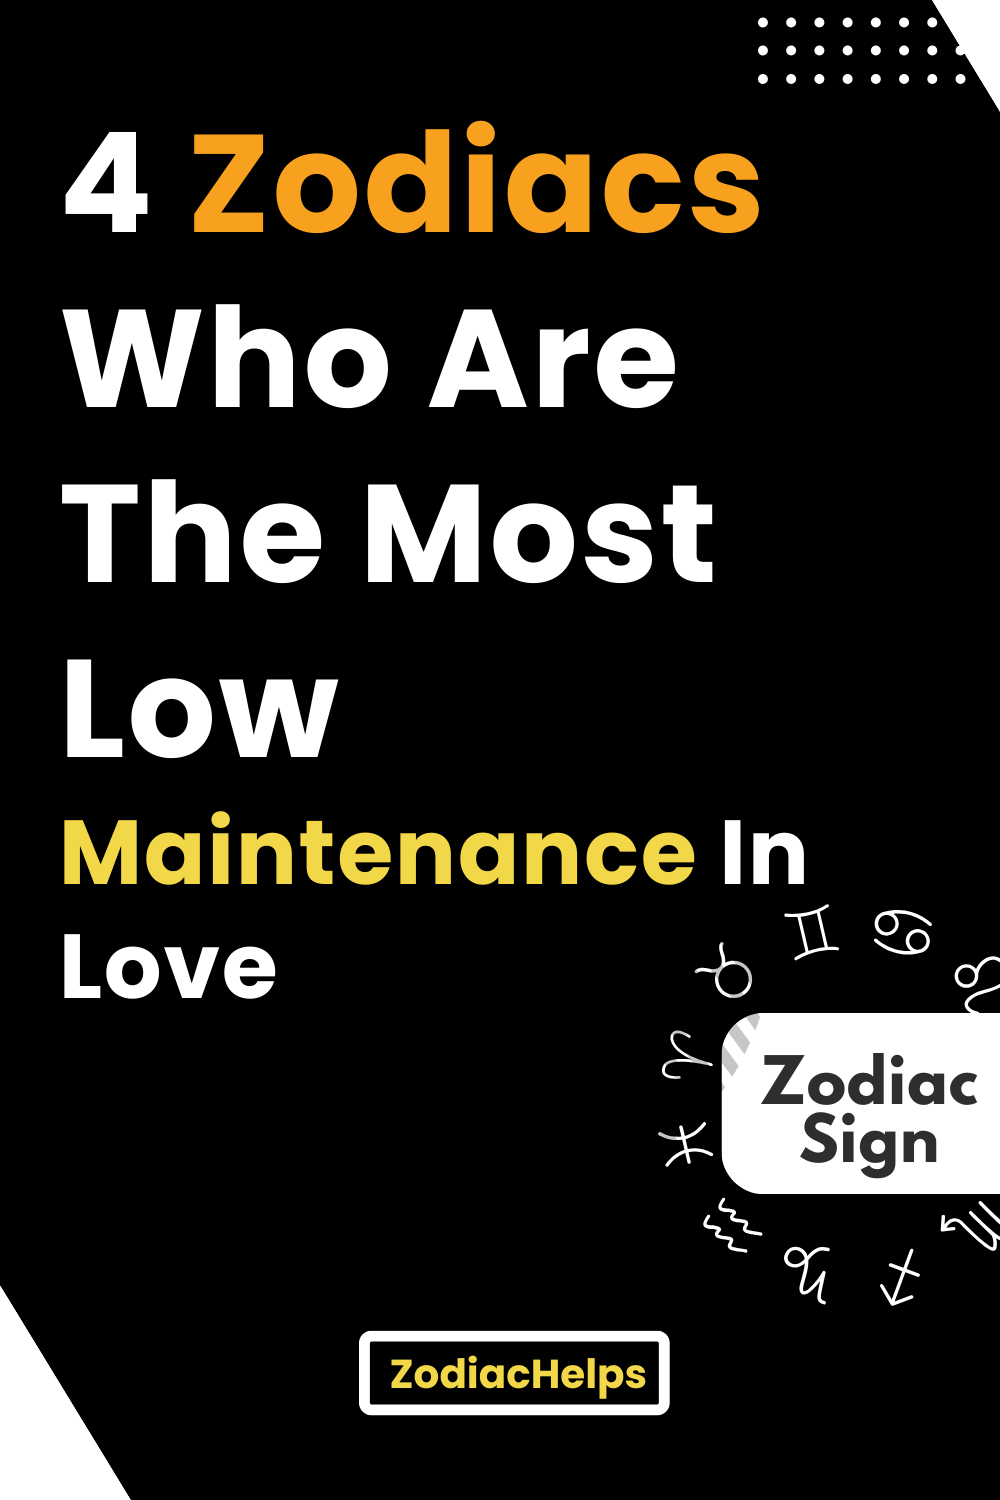 4 Zodiacs Who Are The Most Low Maintenance In Love